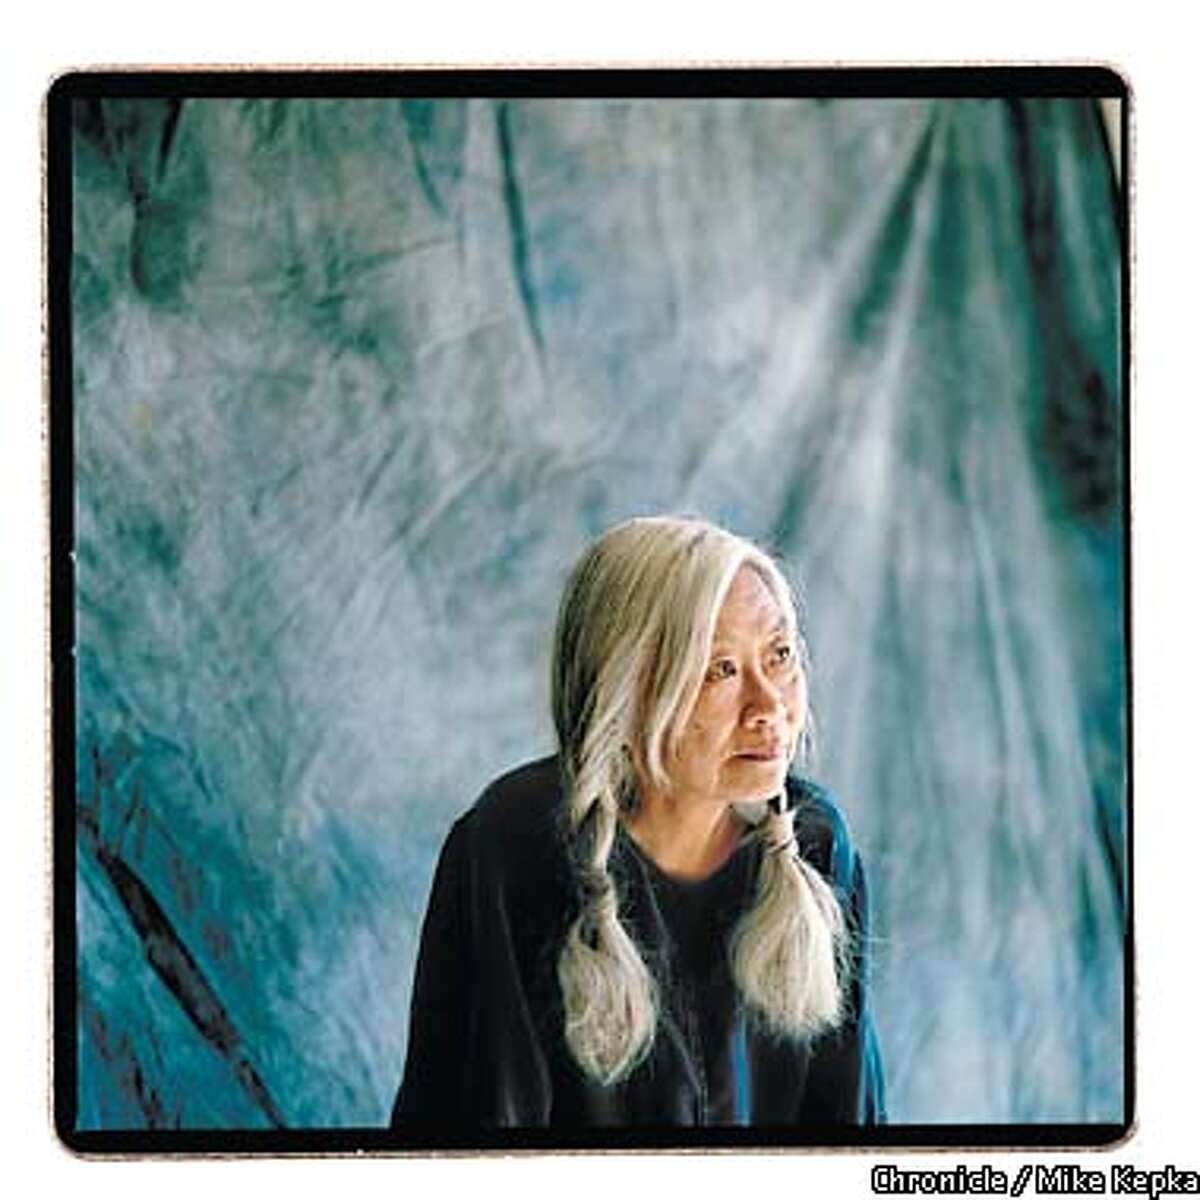 Oakland based author Maxine Hong Kingston wrote "The Woman Warrior" and the fourth coming book called the "Fifth Book of Peace." BY MIKE KEPKA/THE CHRONICLE